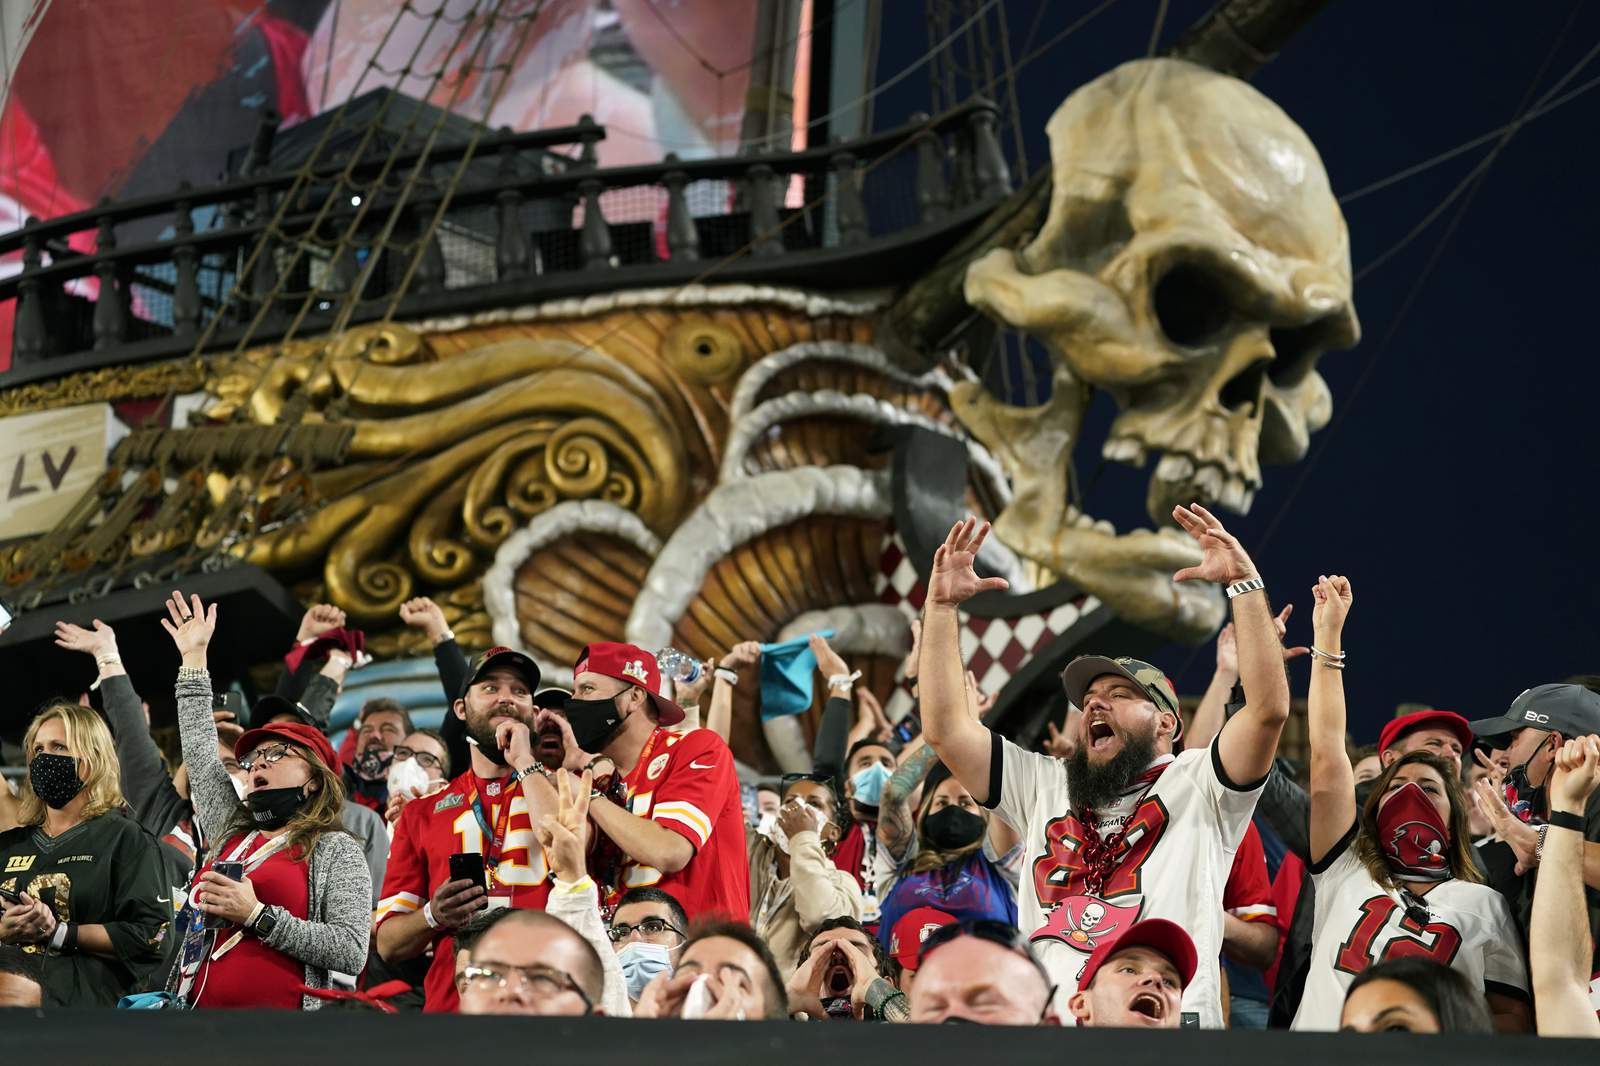 Tampa Bay Buccaneers to celebrate Super Bowl win with socially distant boat parade